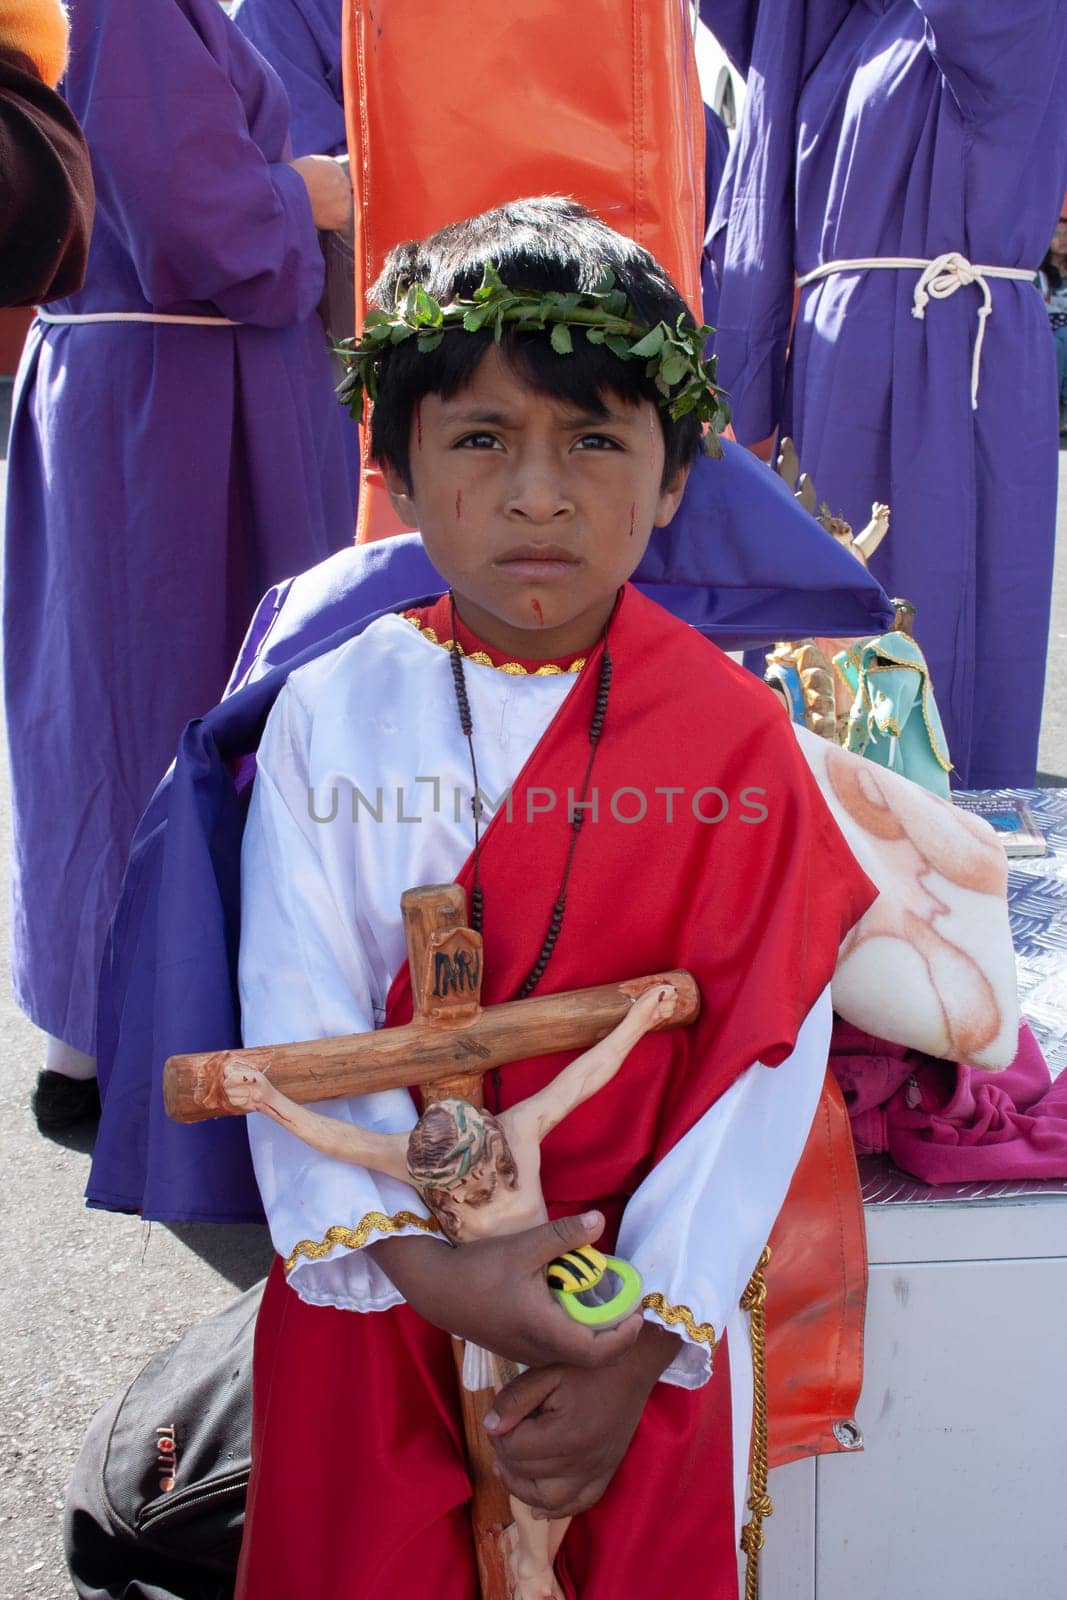 child in holy week procession with the cross of jesus christ in his hands by Raulmartin